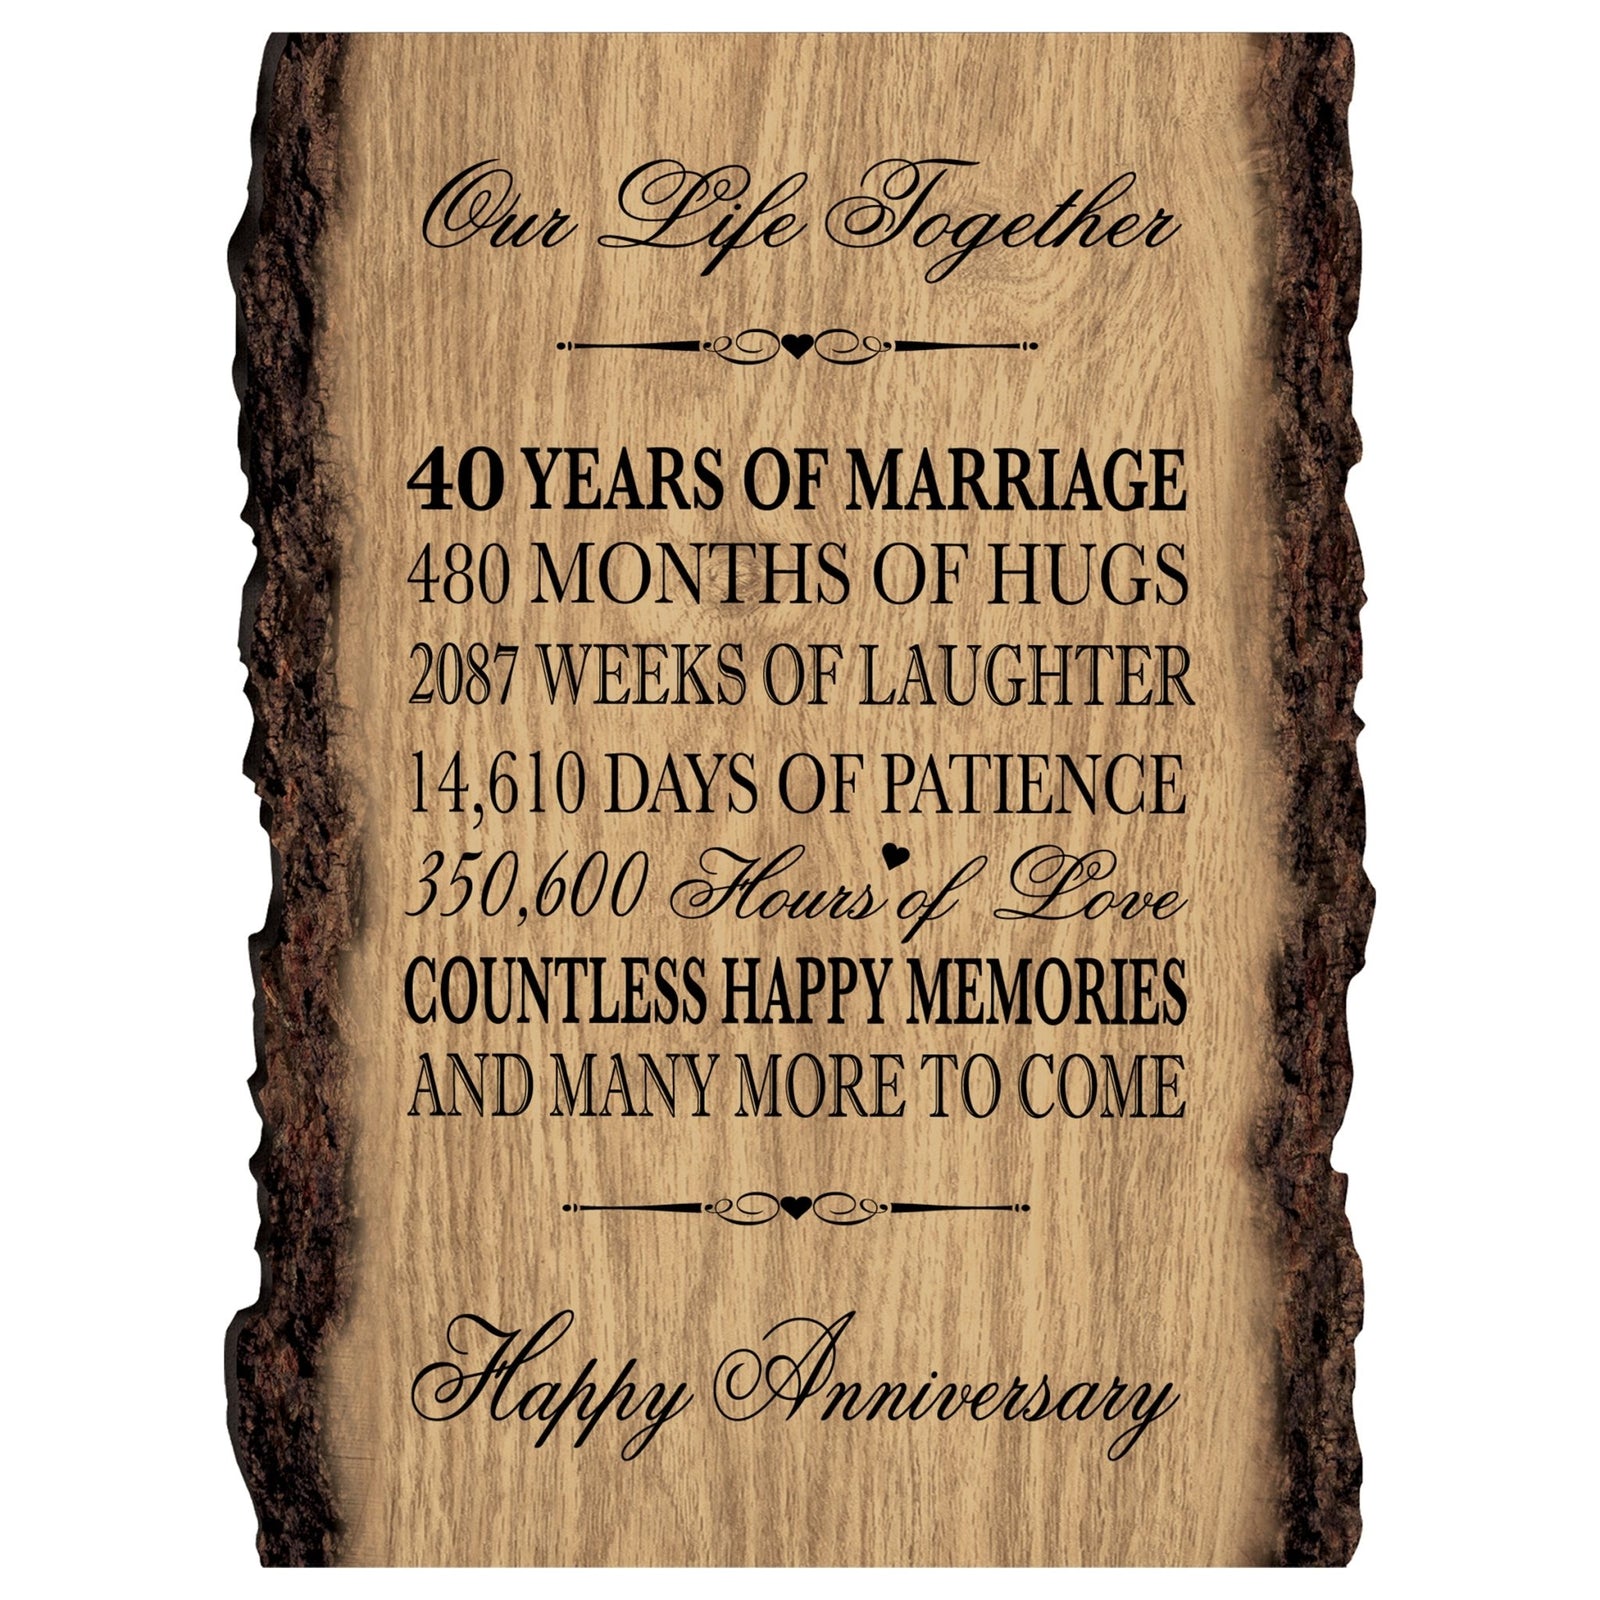 Rustic Wedding Anniversary 9x12 Barky Wall Plaque Gift For Parents, Grandparents New Couple - 40 Years Of Marriage - LifeSong Milestones